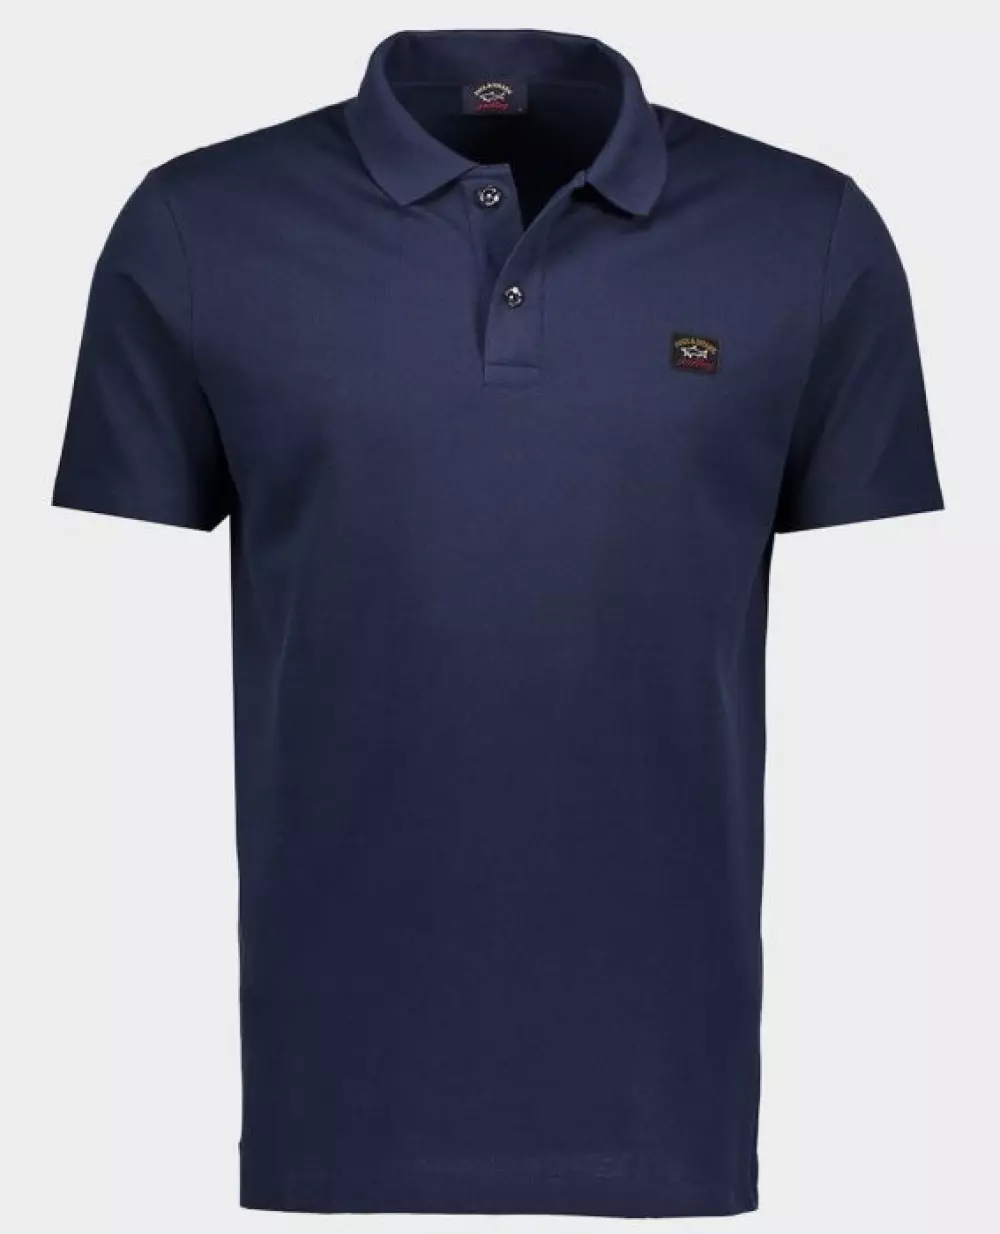 PAUL & SHARK - MEN'S KNITTED POLO SHIRT C.W. COTTON, POLO & RUGBY, KORT ARM, PAUL & SHARK, C0P1001_13, HERRE, OUTSIDE:100%COTTON, BLUE